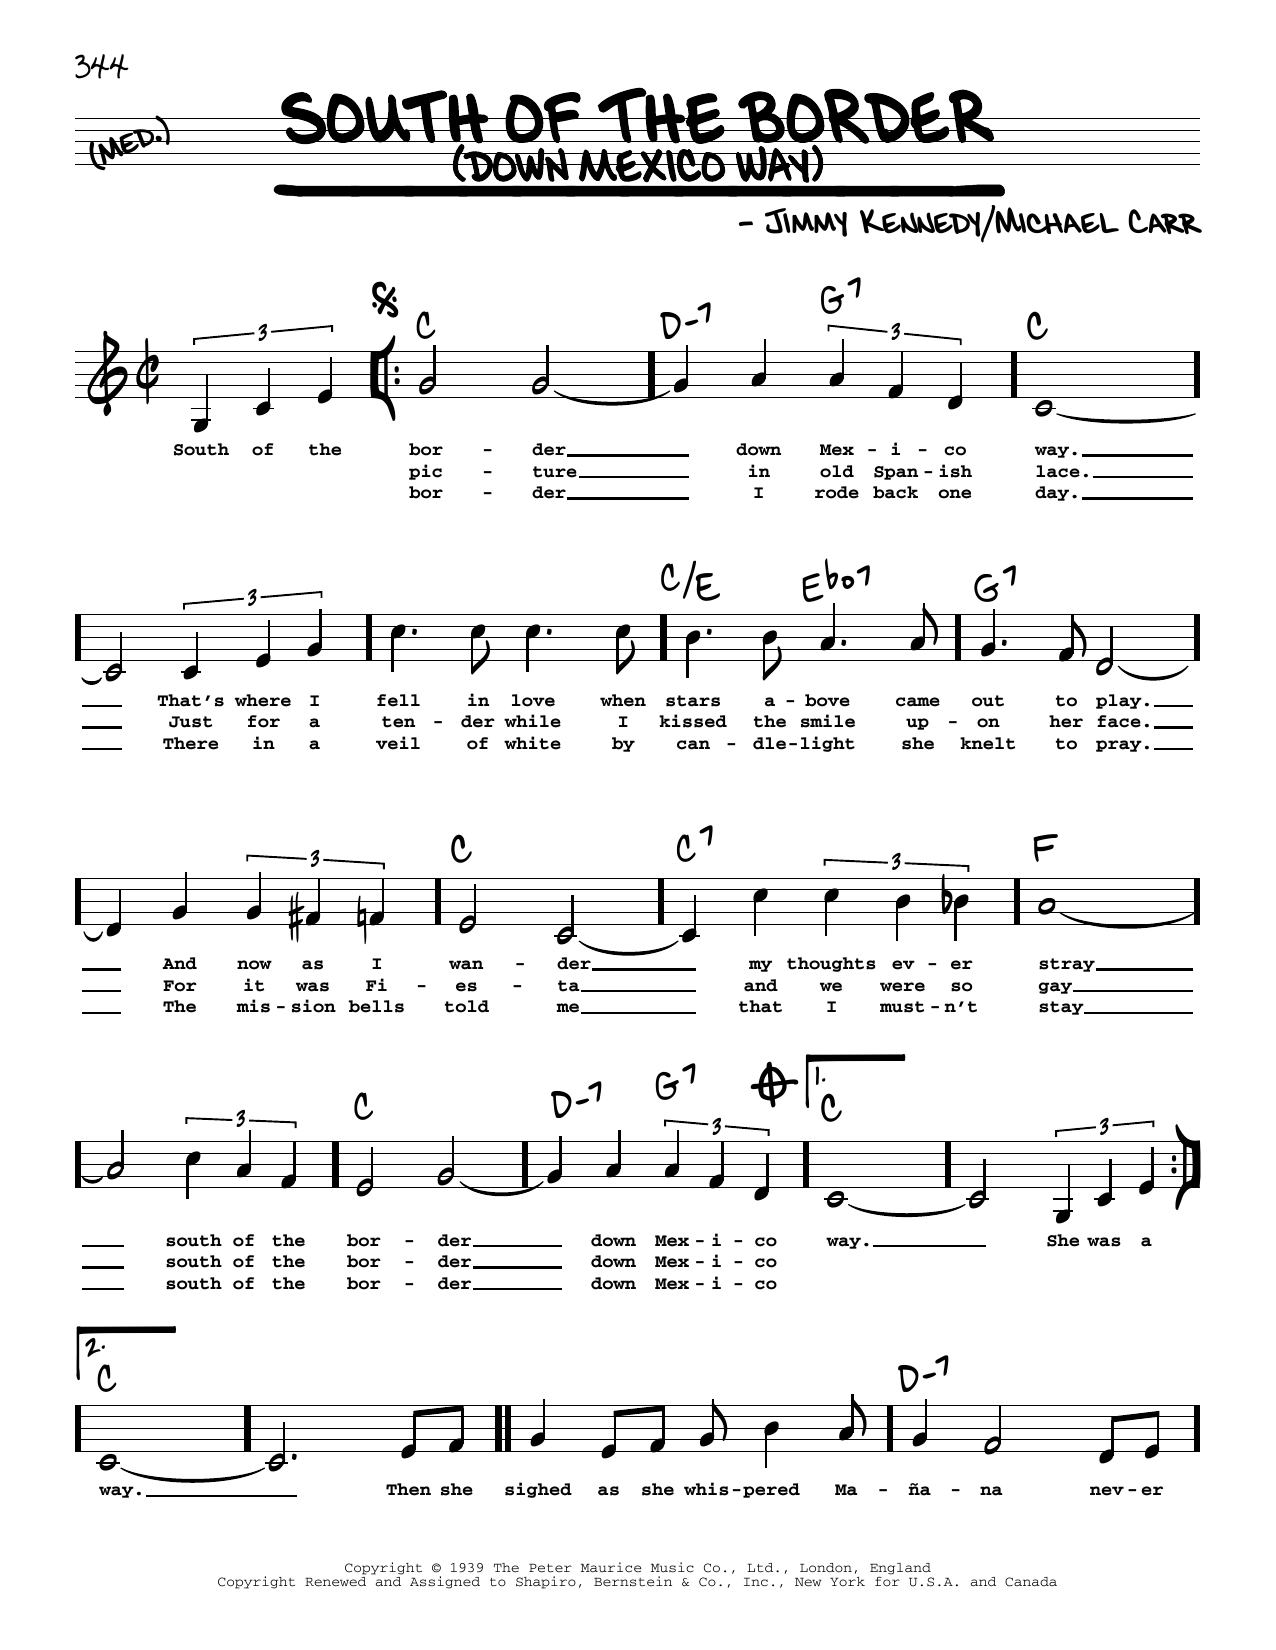 Patsy Cline South Of The Border (Down Mexico Way) (Low Voice) sheet music notes printable PDF score